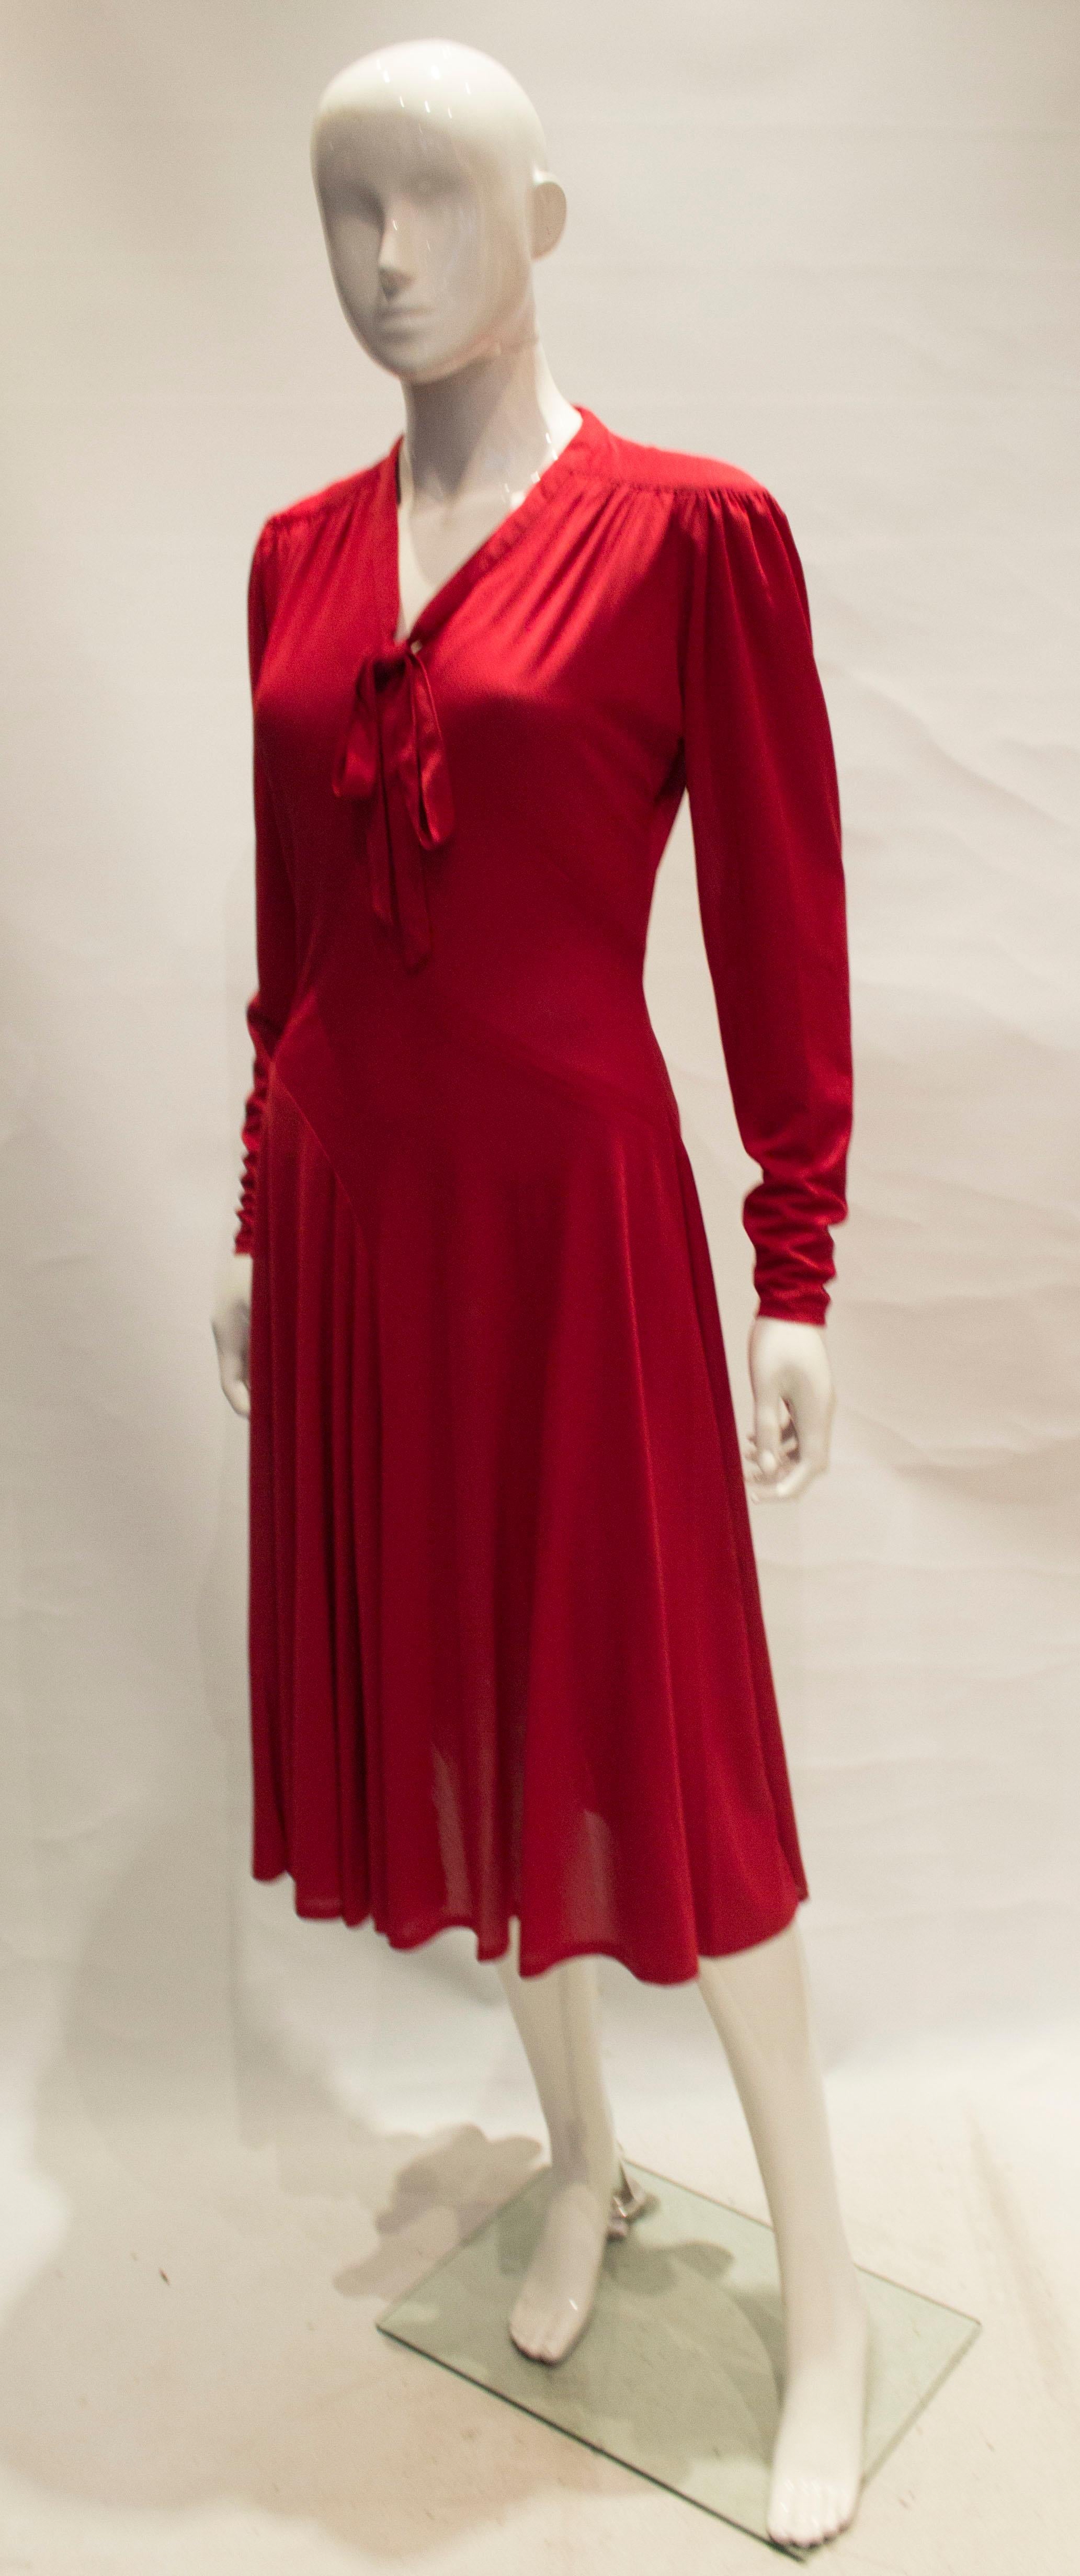 Vintage Jerseymasters Red Dress In Good Condition For Sale In London, GB